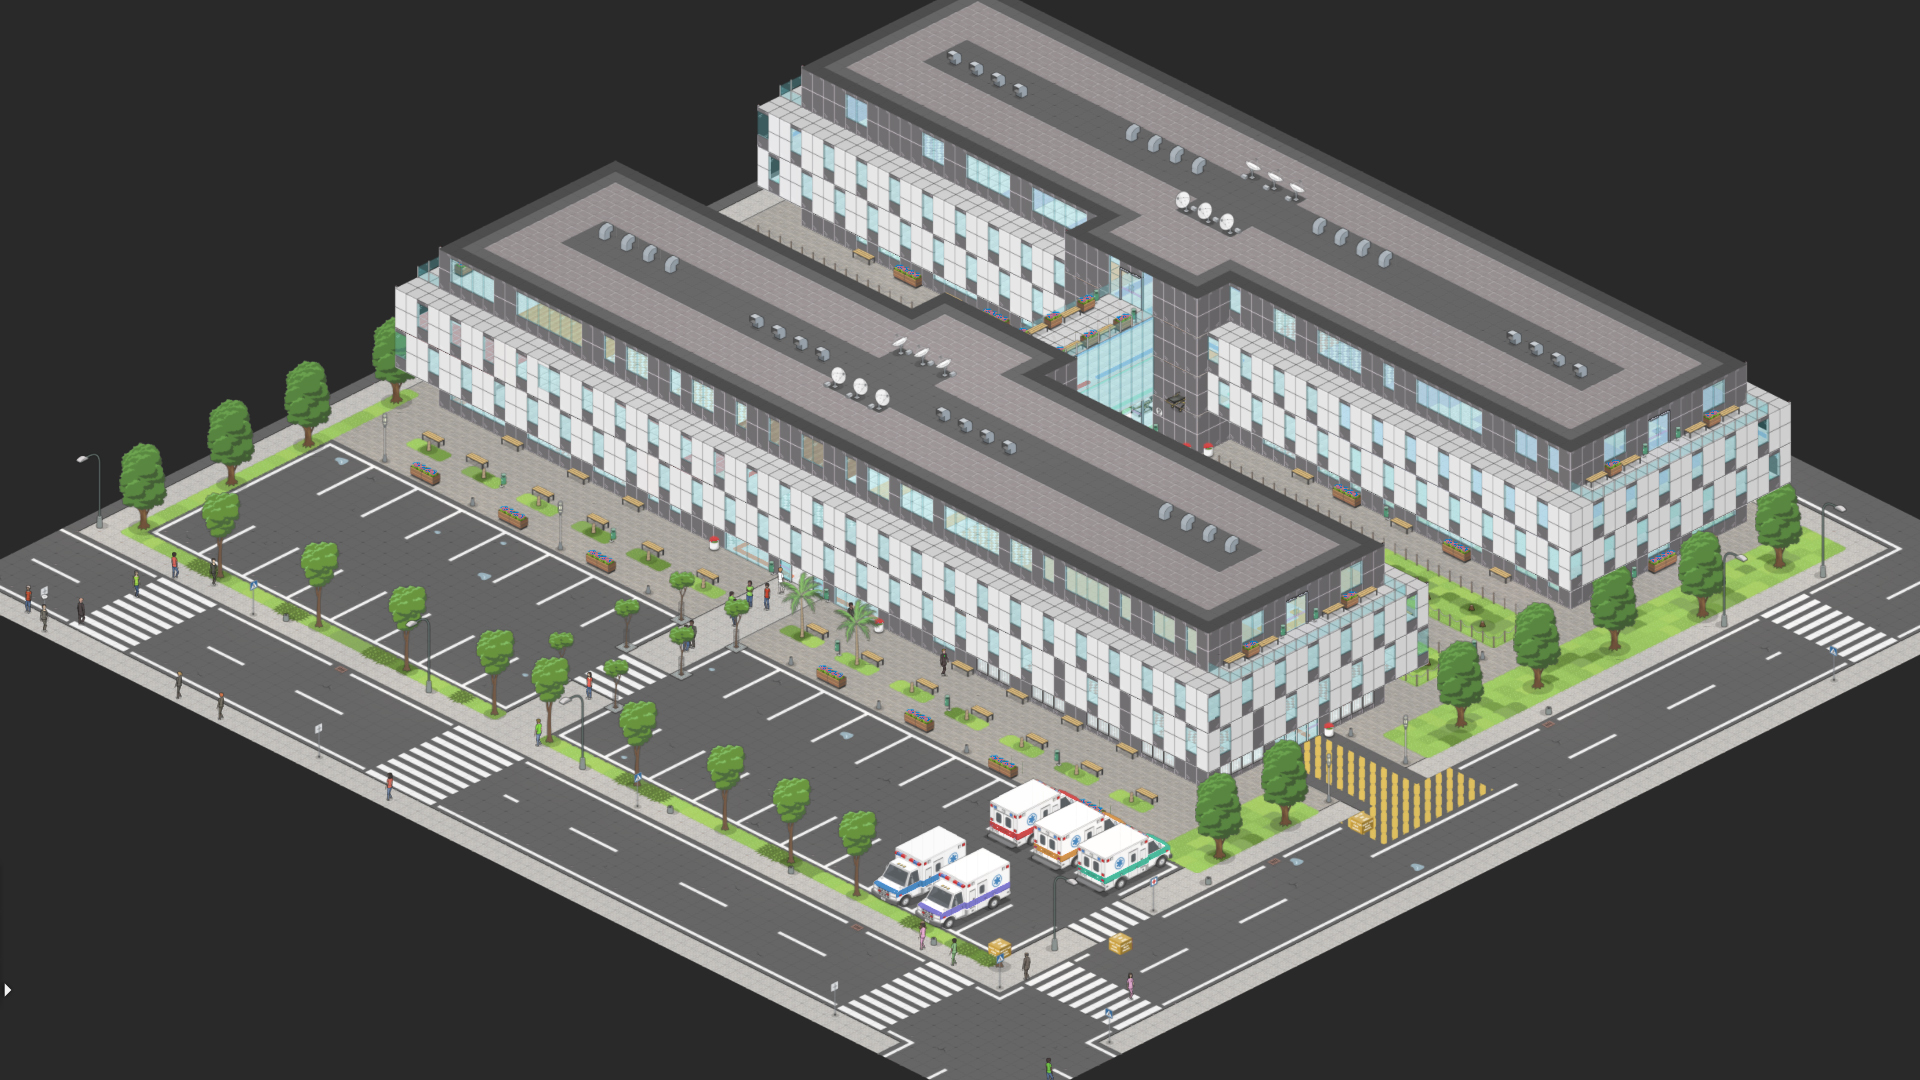 Project hospital - hospital services download free version